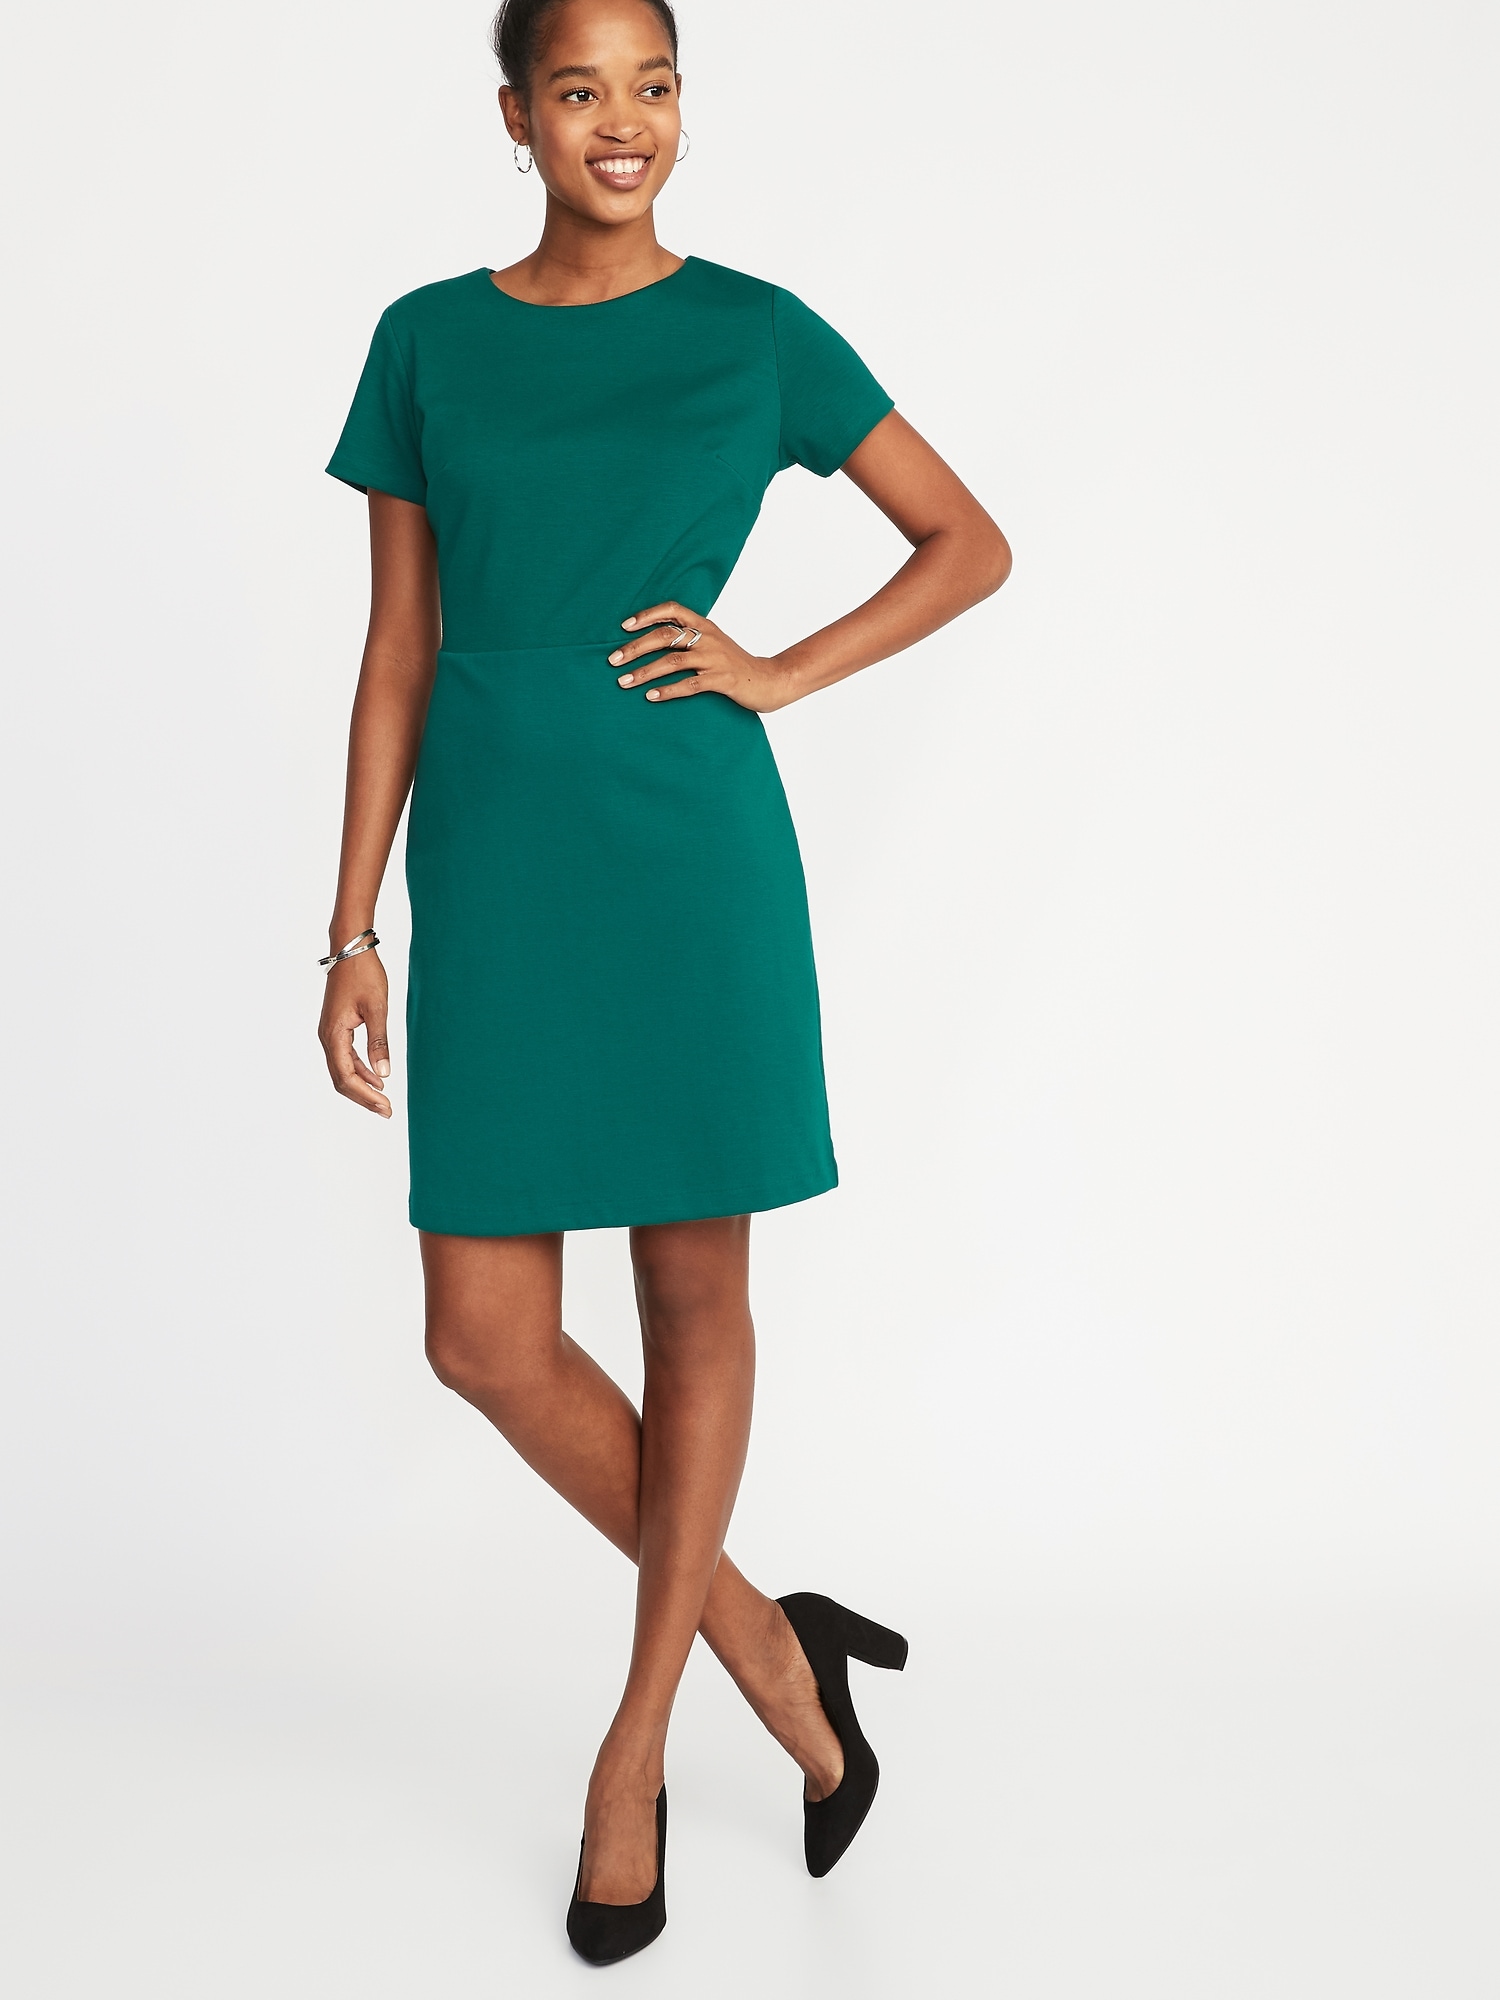 Ponte knit sheath dress from Old Navy